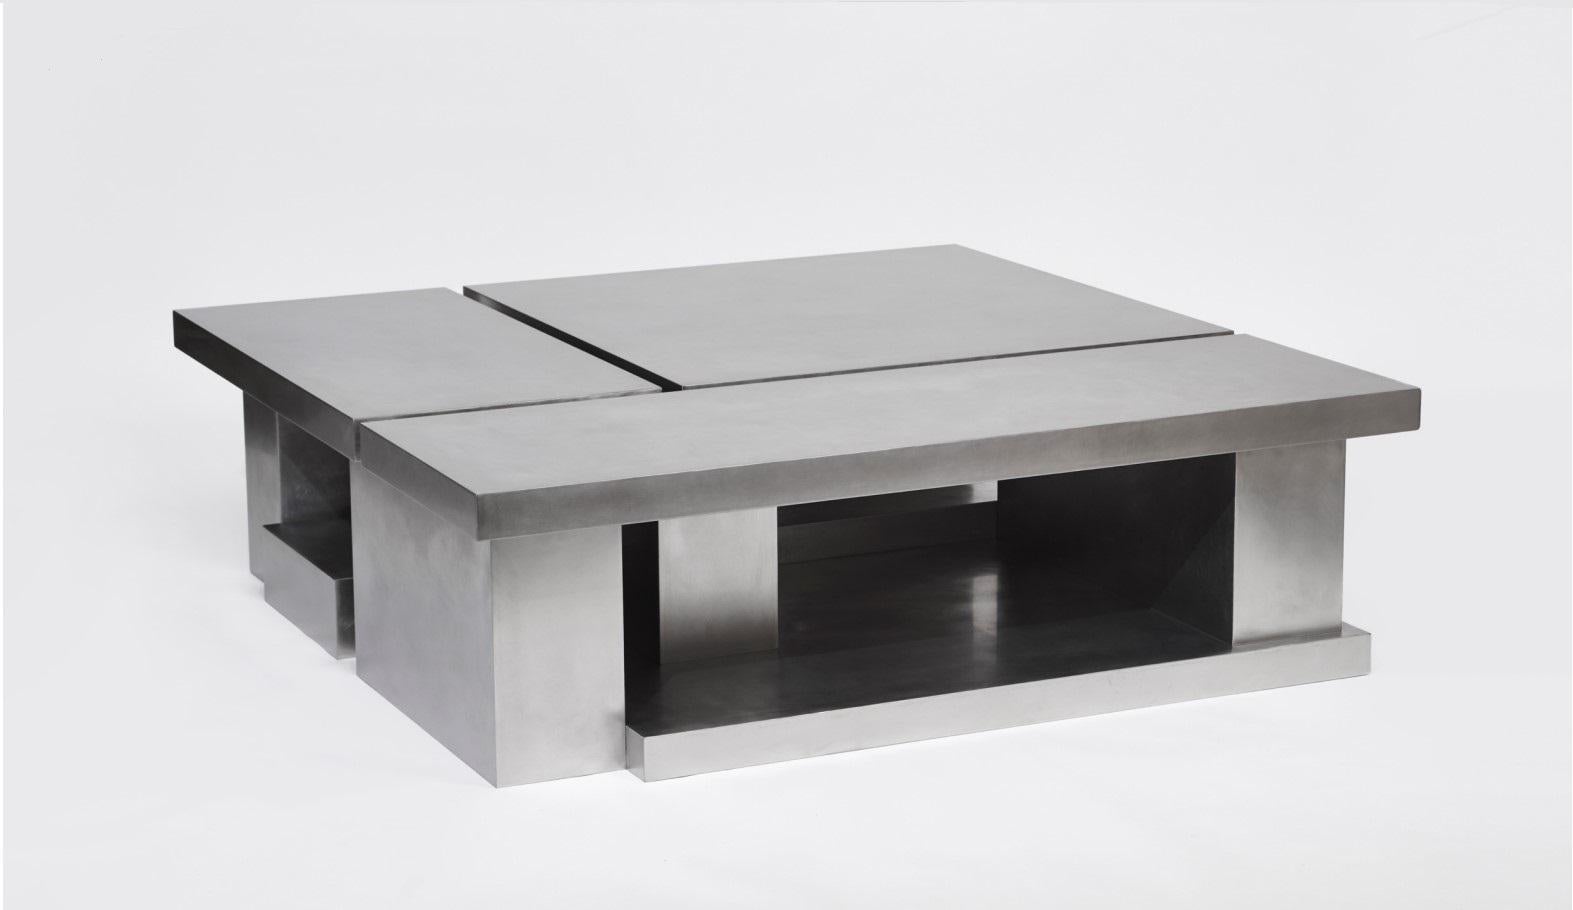 Korean Layered Steel Coffee Table i by Hyungshin Hwang For Sale